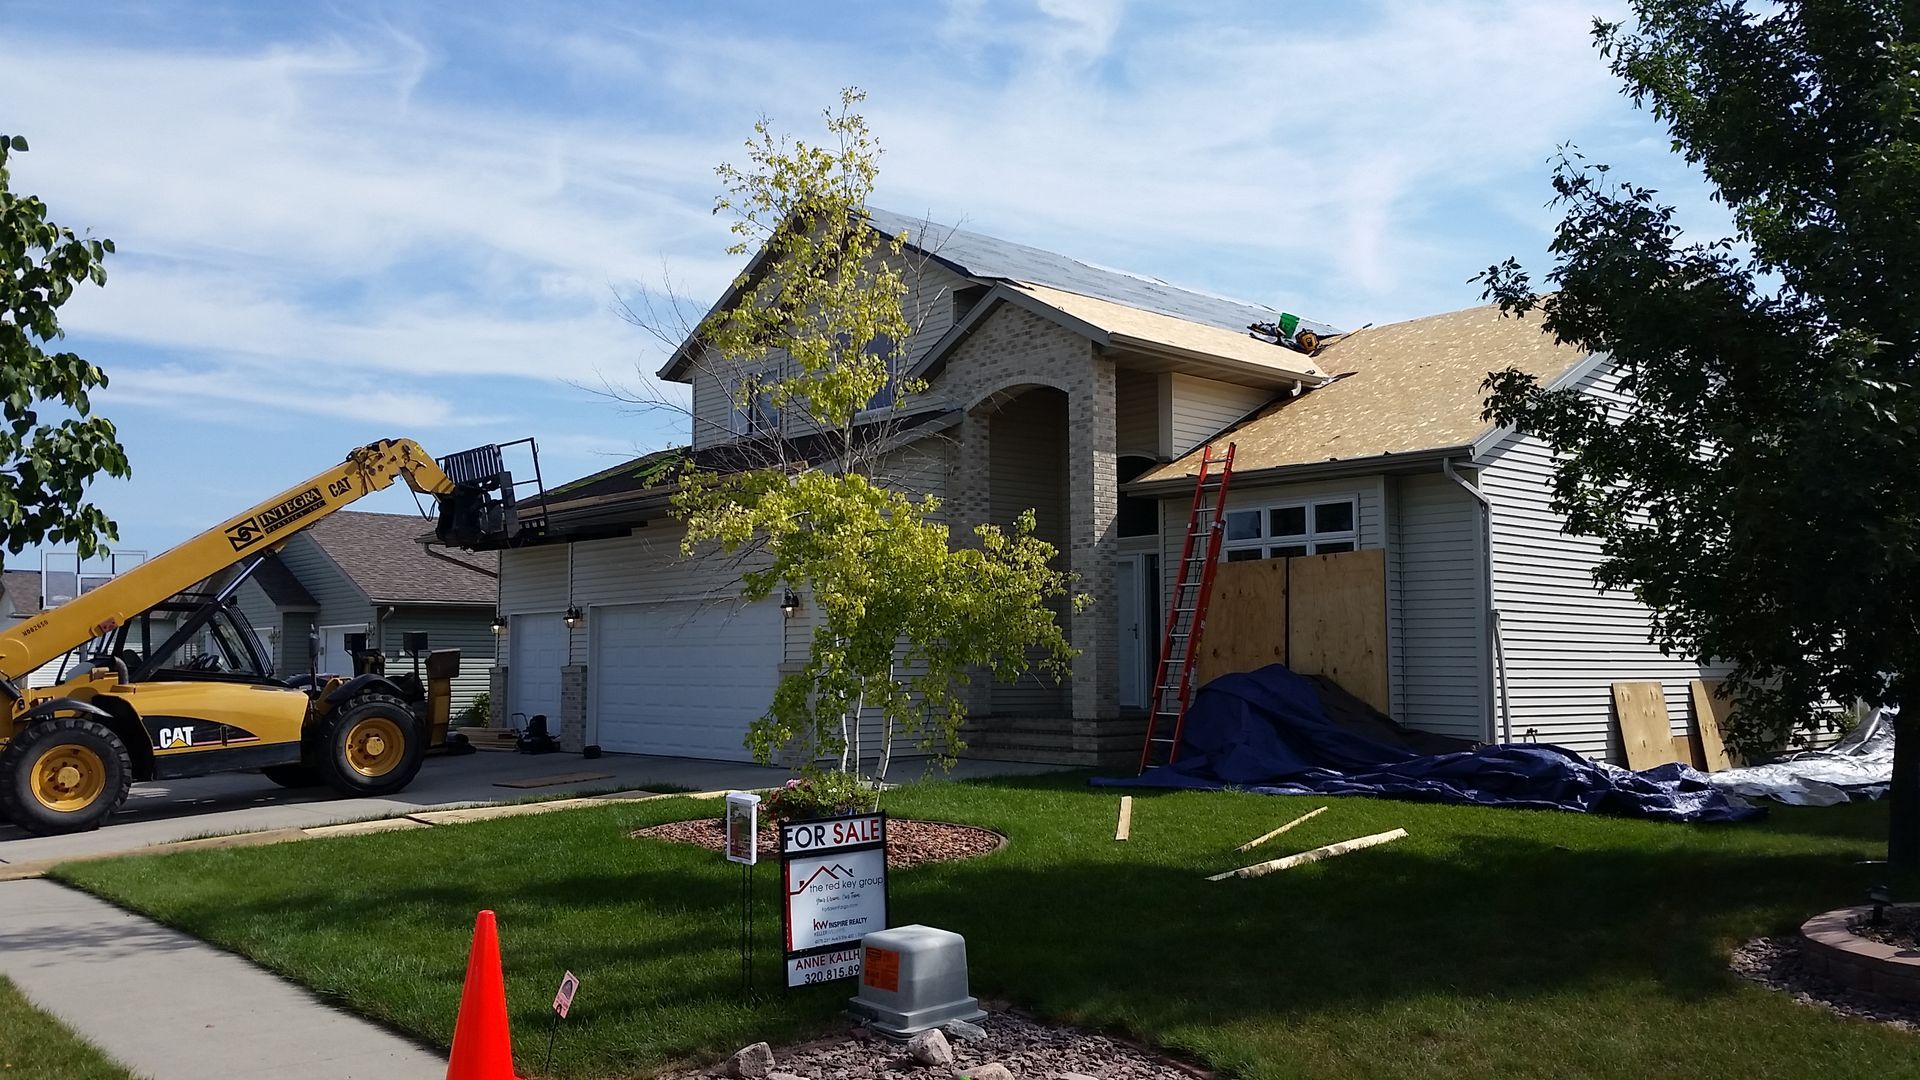 Roofing Business Removing Nails and Tar Paper Felt Underlayment with Forklift in West-Fargo-North-Dakota